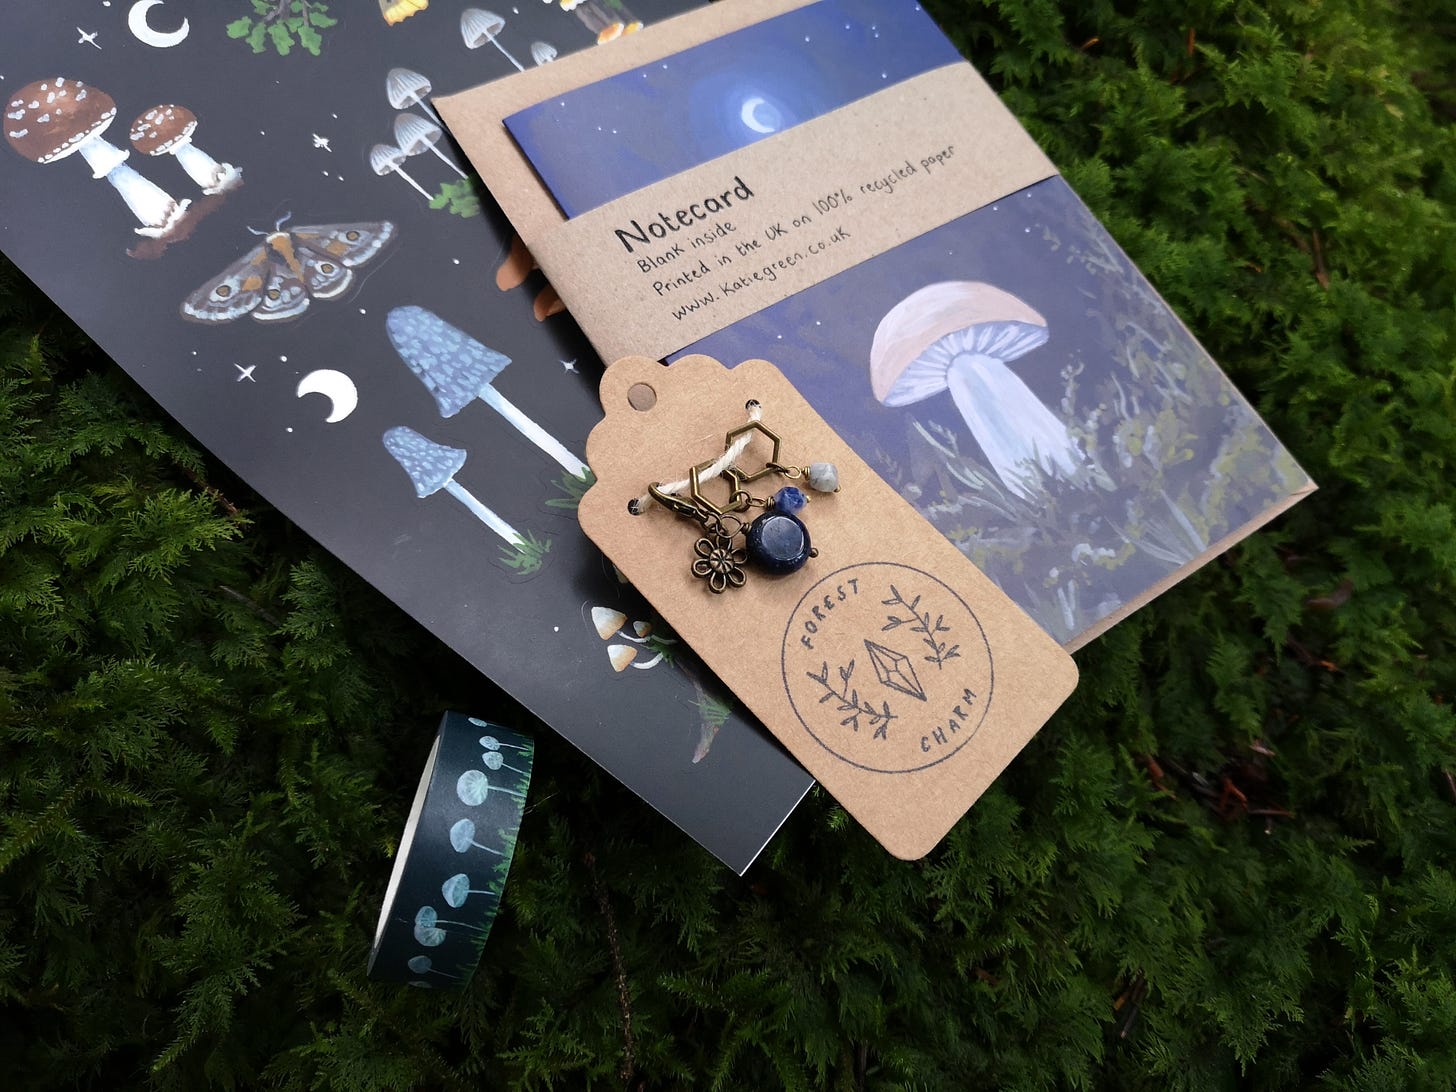 Image description: A bundle of goodies lying on some squishy green moss: a set of stitch markers and progress keepers featuring sodalite beads and a flower charm, lying on top of a notecard with a mushroom and moon, some stickers of mushrooms moths and moons and a roll of dark blue washi tape with white mushrooms.